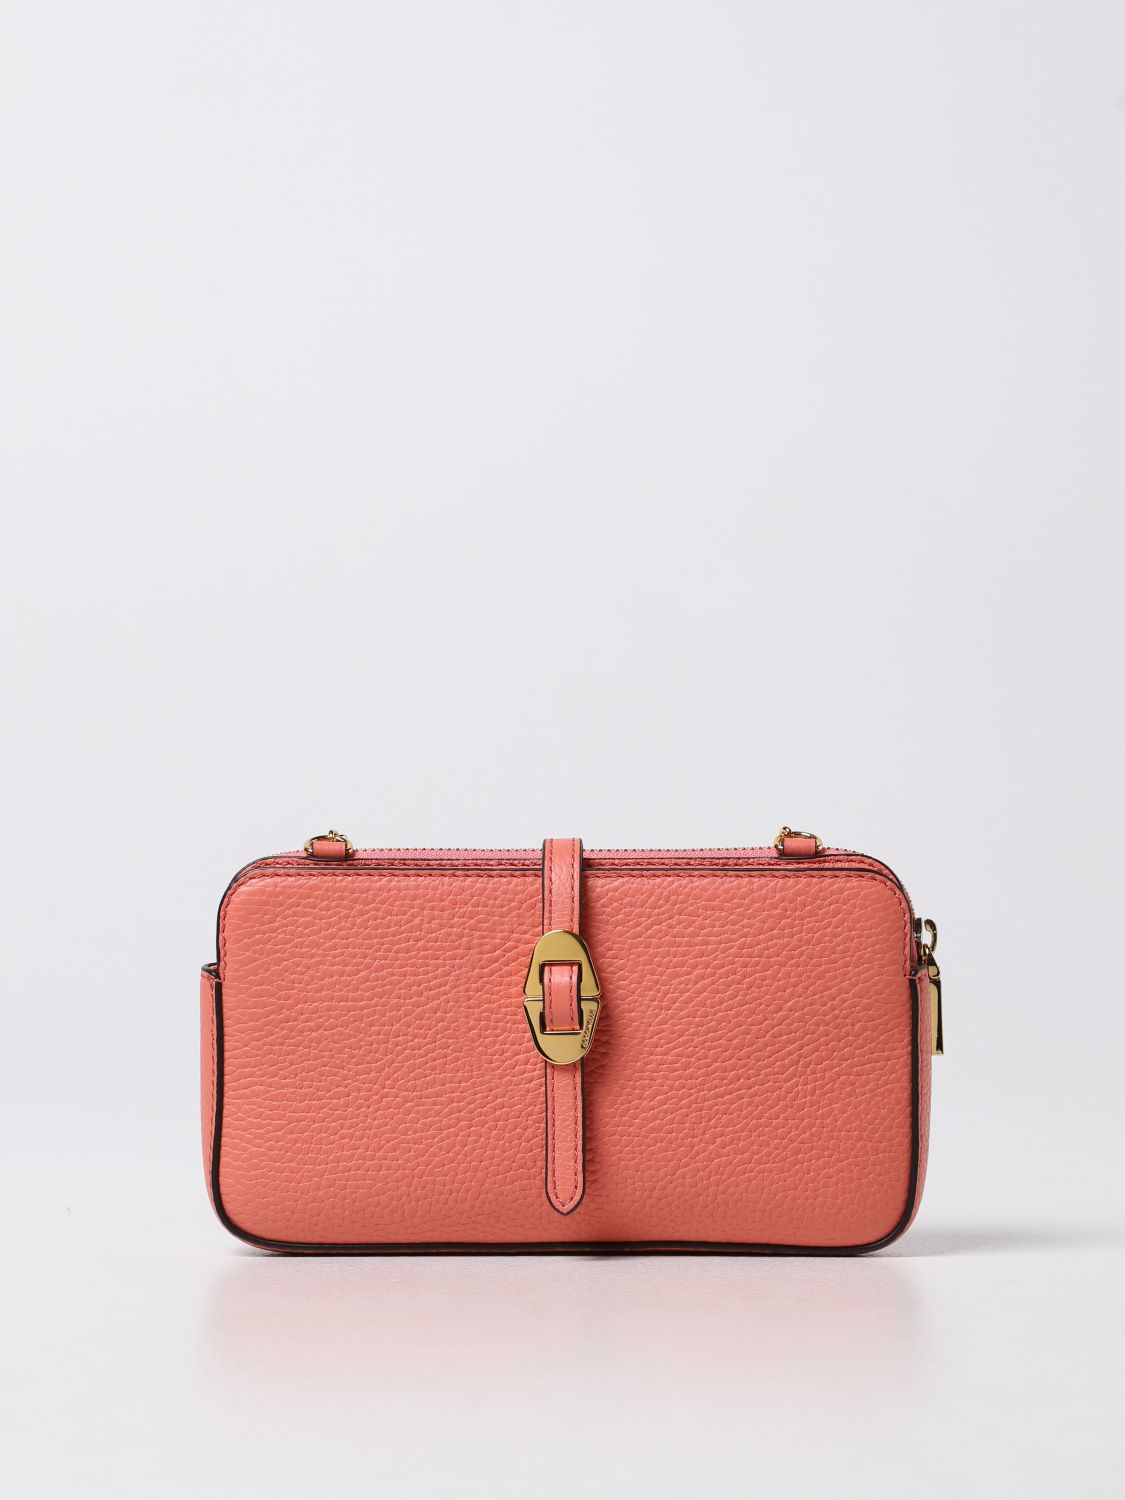 Coccinelle Crossbody Bag In Textured Leather In Geranium